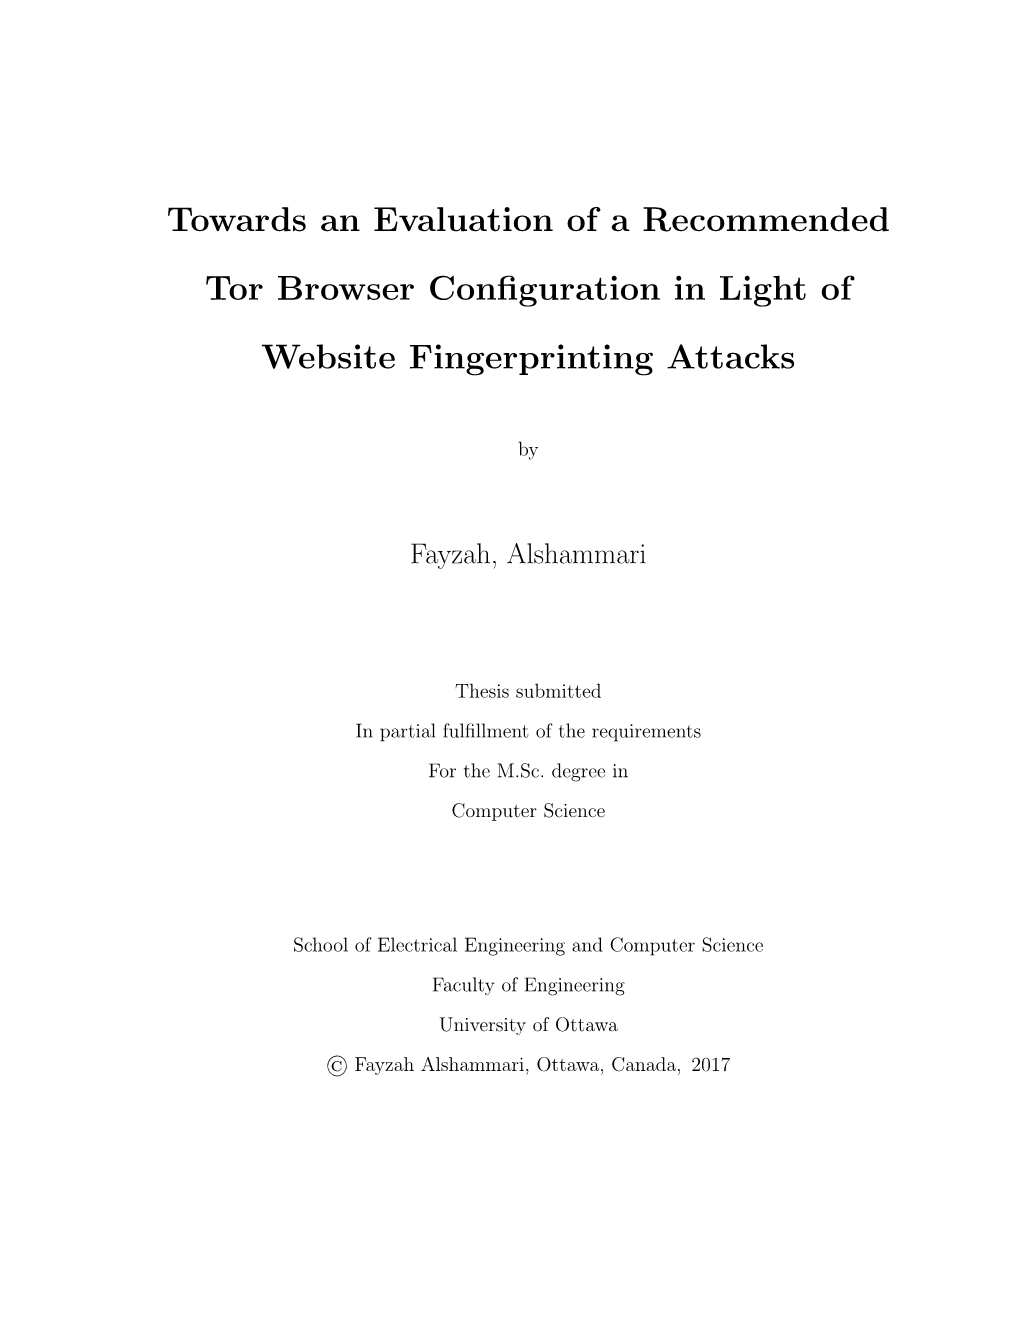 Towards an Evaluation of a Recommended Tor Browser Conﬁguration in Light of Website Fingerprinting Attacks